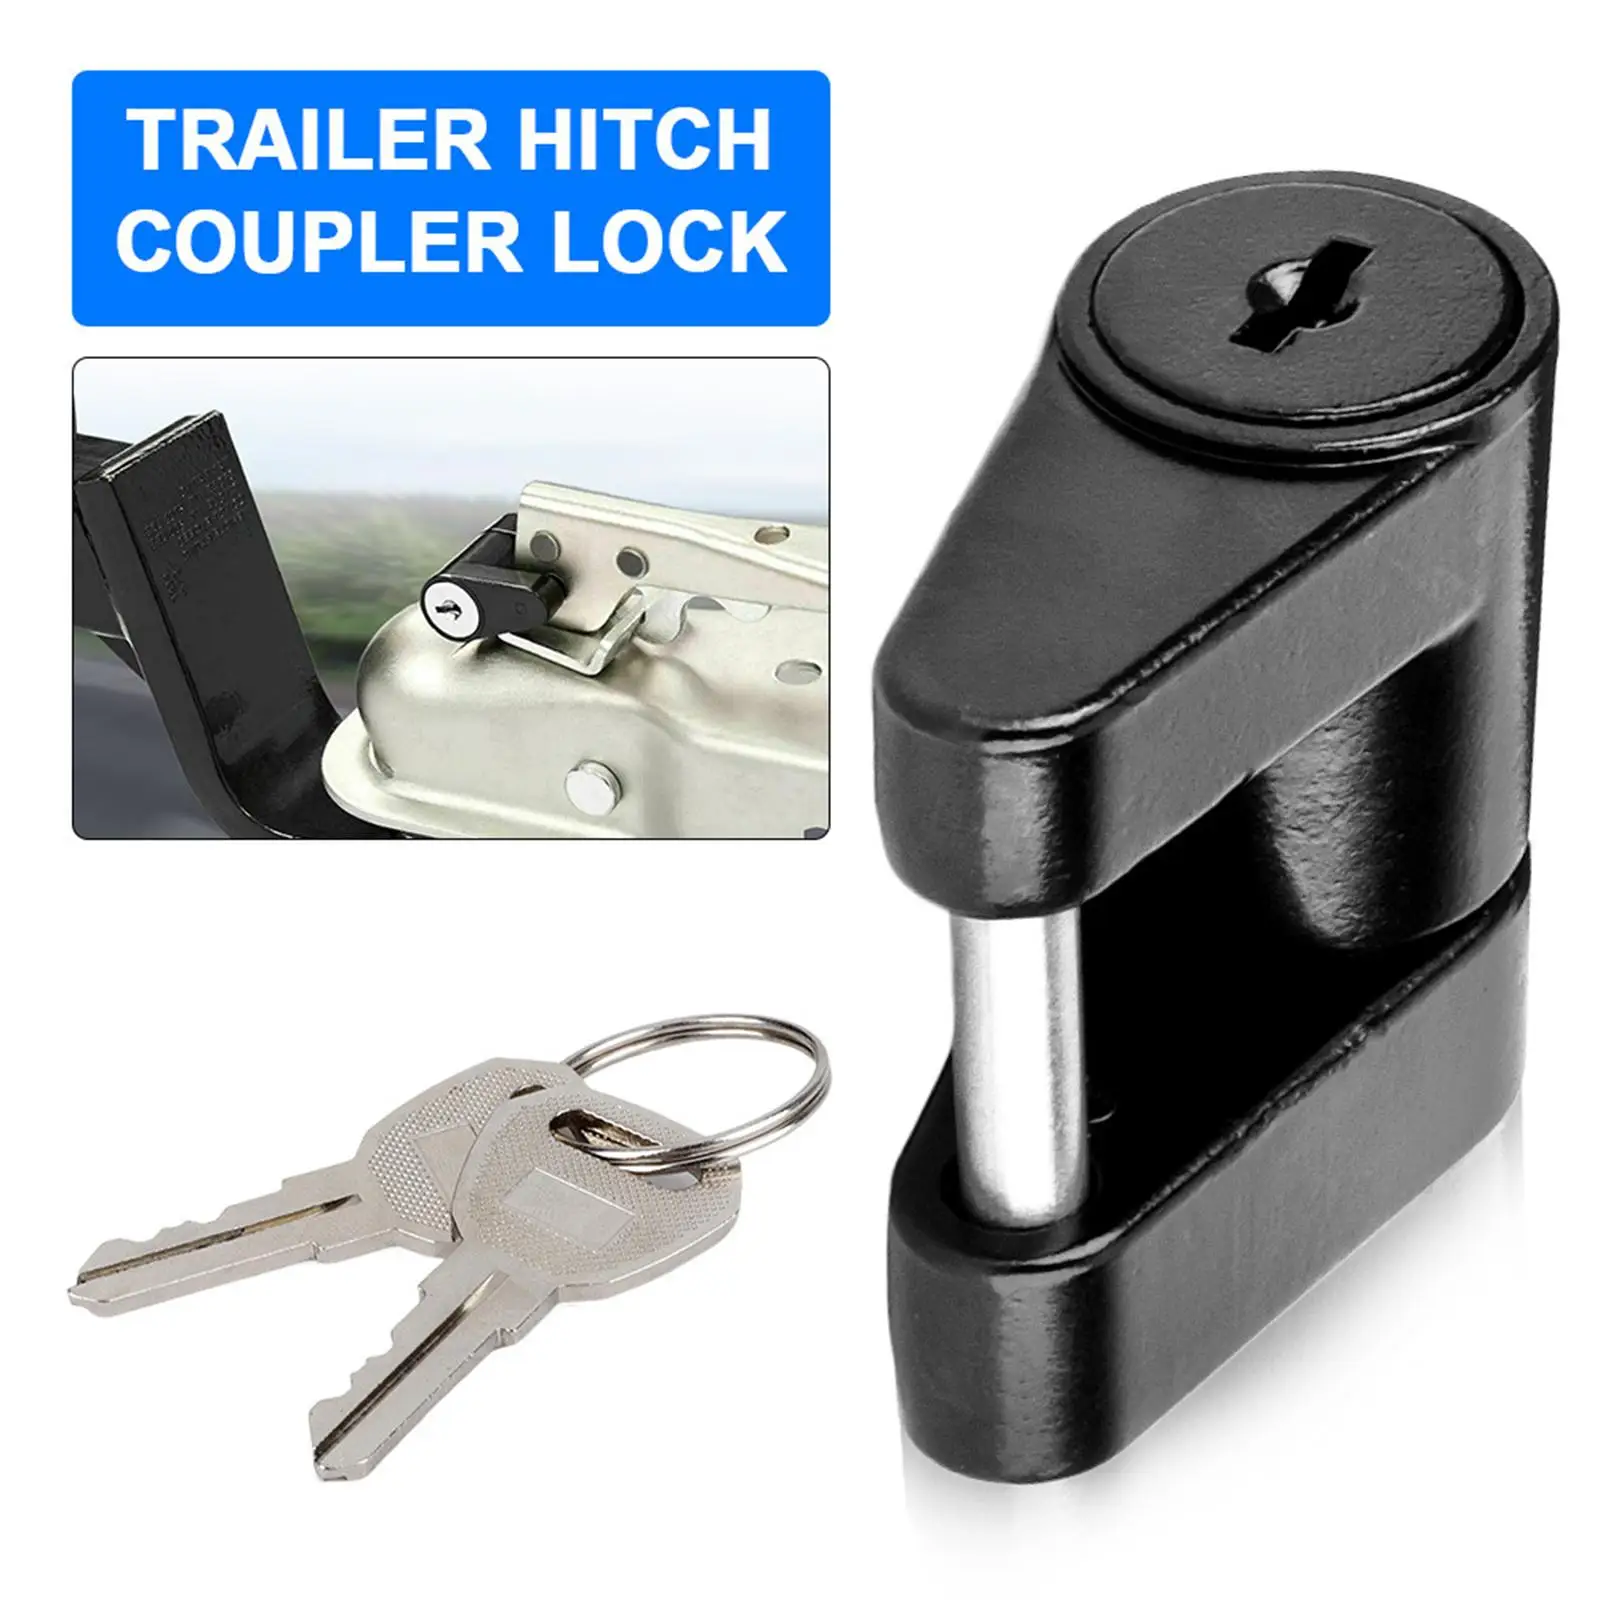 Trailer Hitch Coupler Lock with 2 Keys 1/4 inch Pin for Car Coupling Lock RV Construction Vehicles Truck Tow Boat